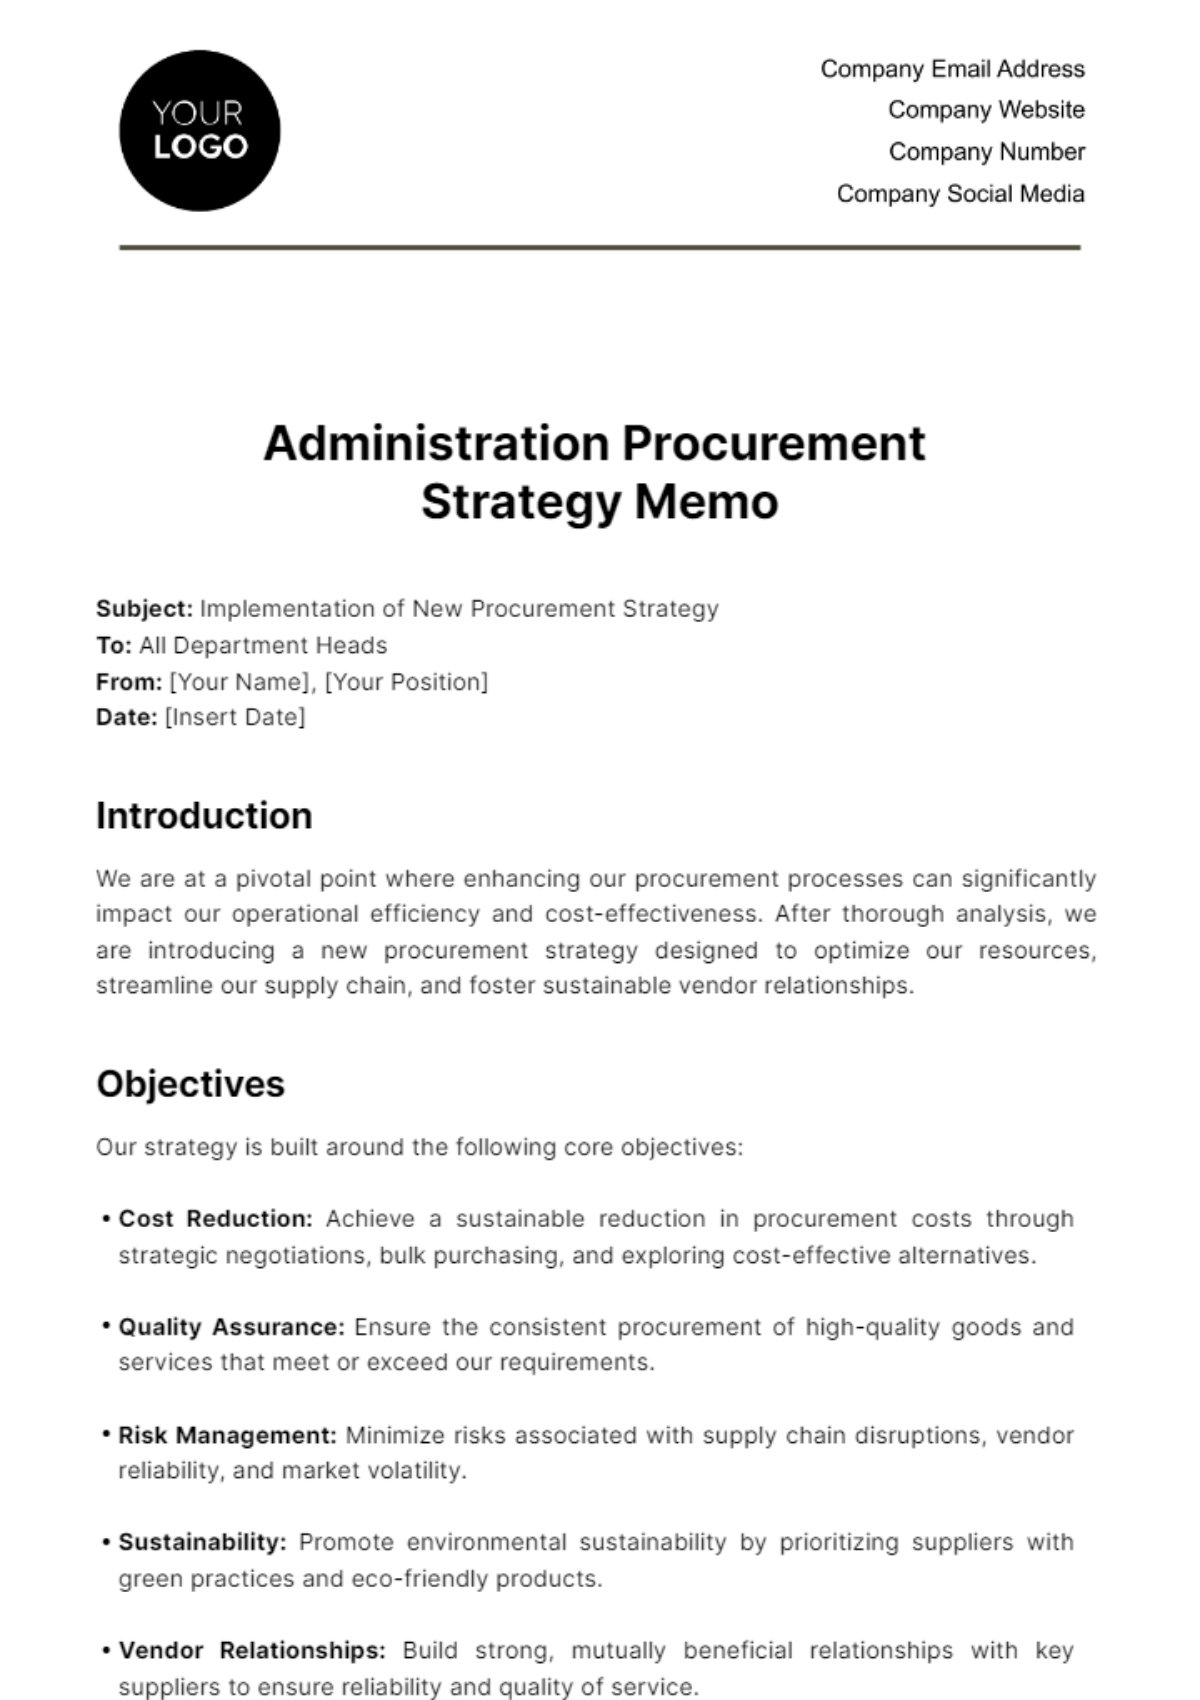 Free Administration Procurement Strategy Memo Template